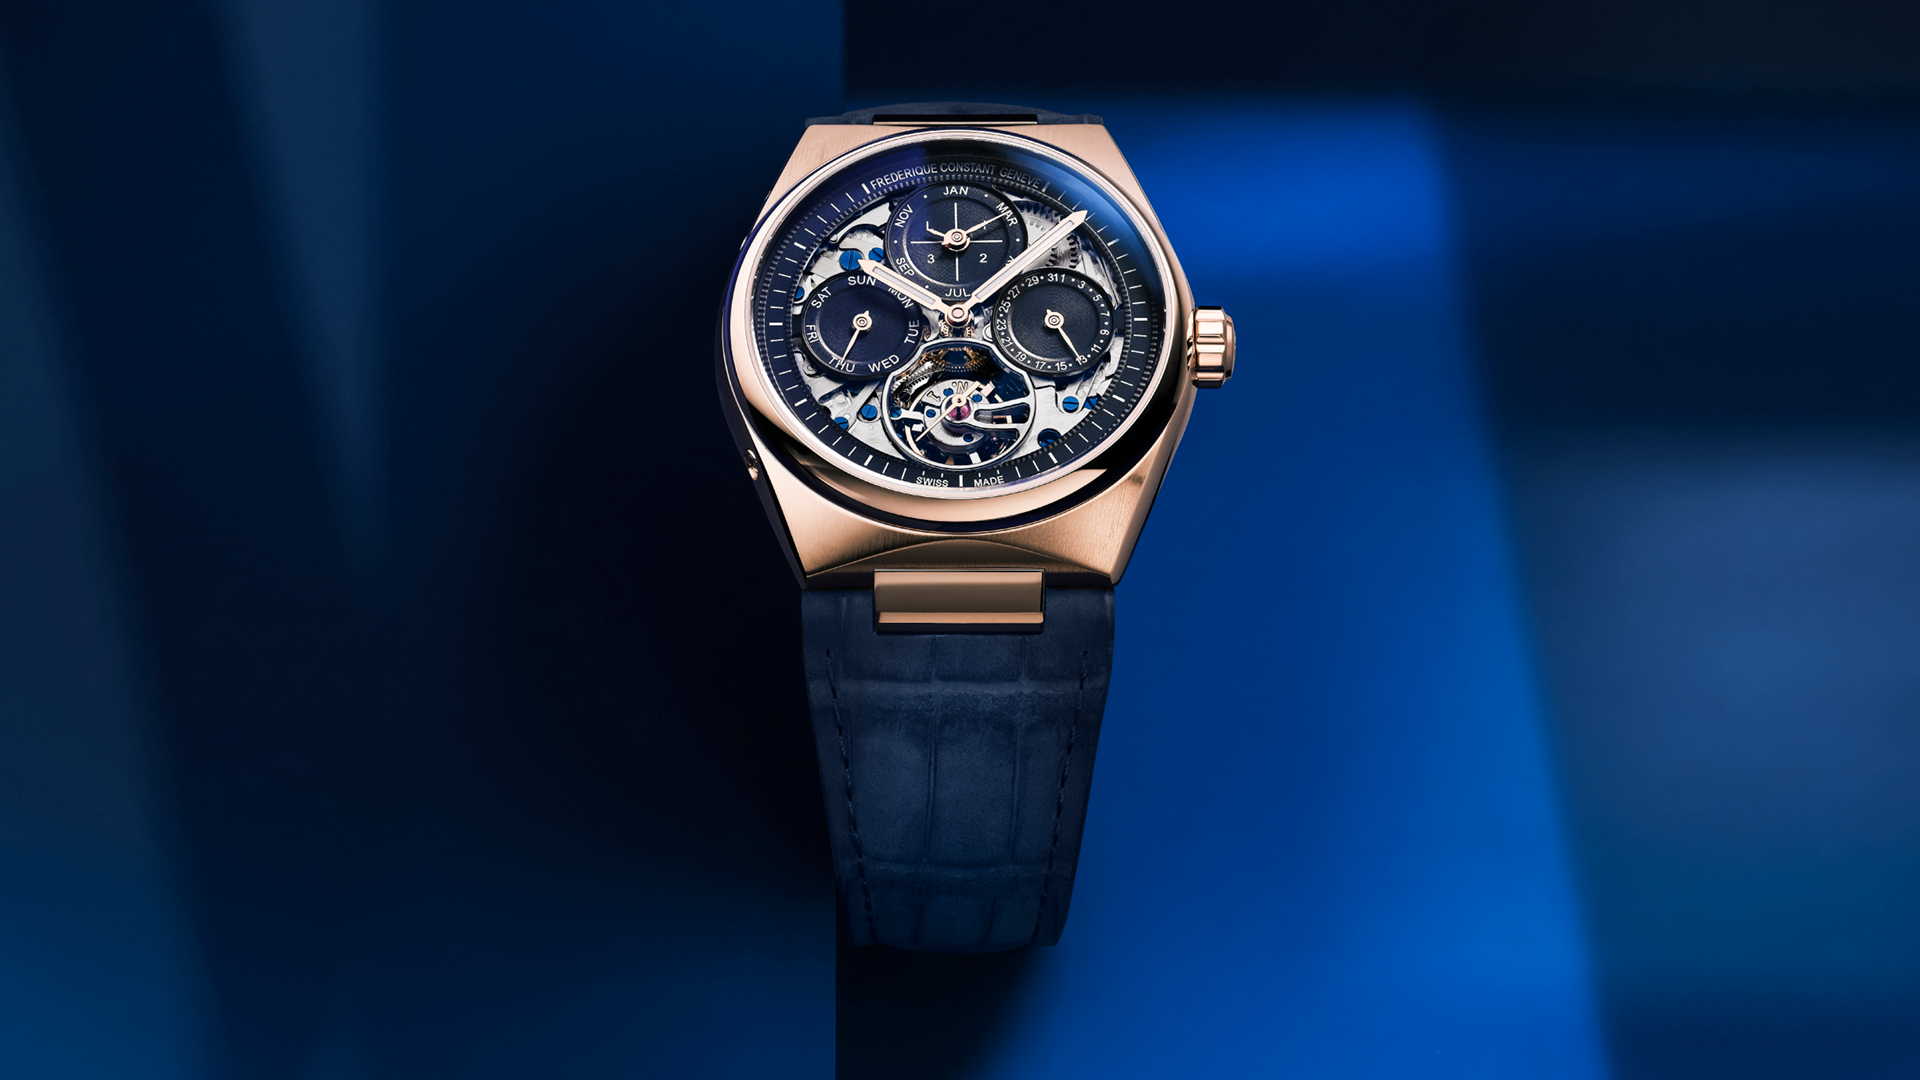 Highlife Tourbillon Perpetual Calendar Manufacture watch for man. Automatic movement, skeleton dial, 18K rose-gold case, date, month and day counters, tourbillon and blue leather integrated and interchangeable strap 